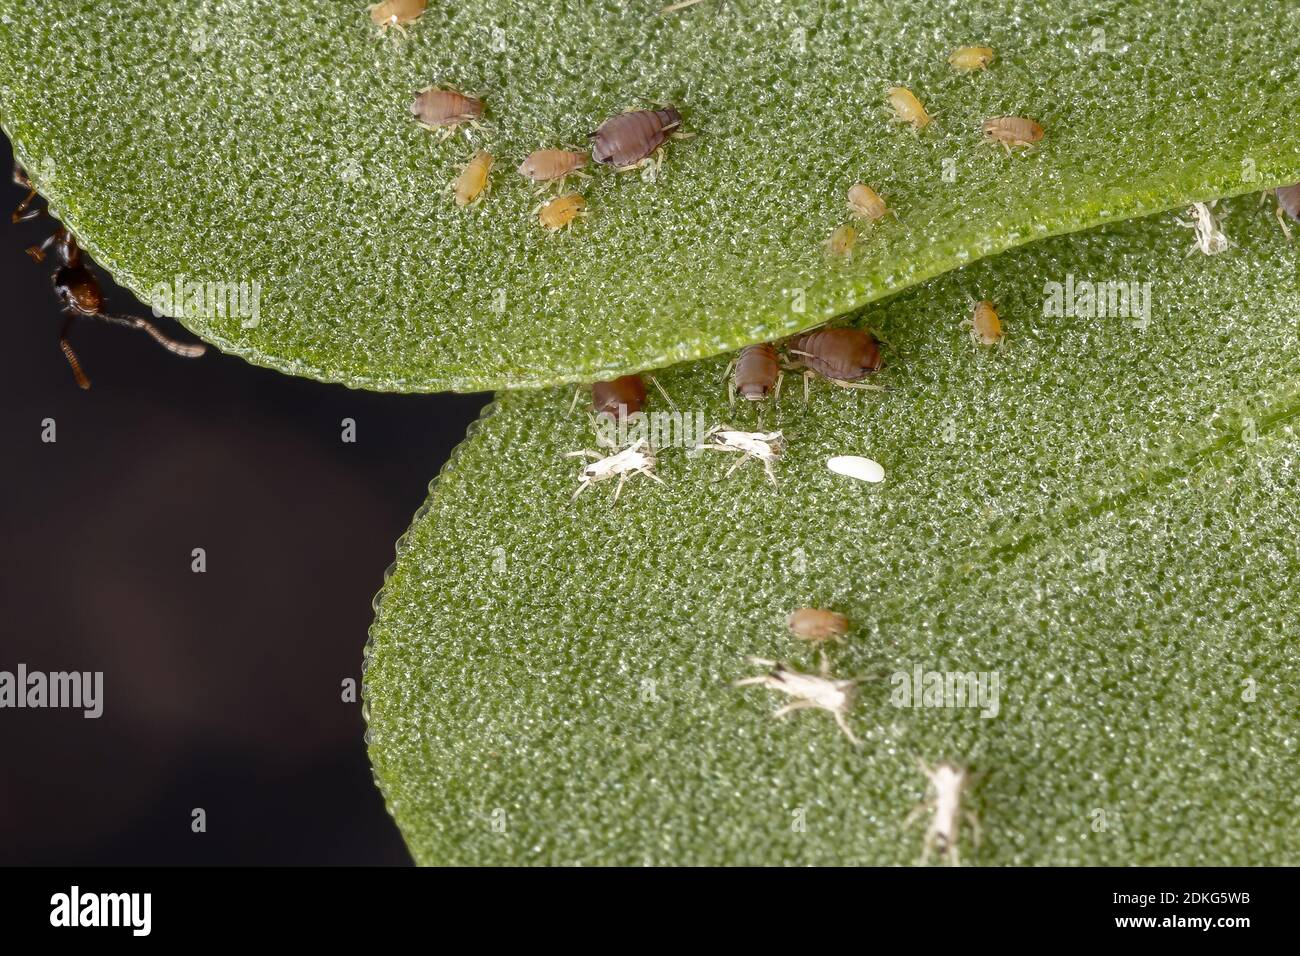 Brown Citrus Aphids of the species Toxoptera citricida eating the Common Purslane plant of the species Portulaca oleracea Stock Photo